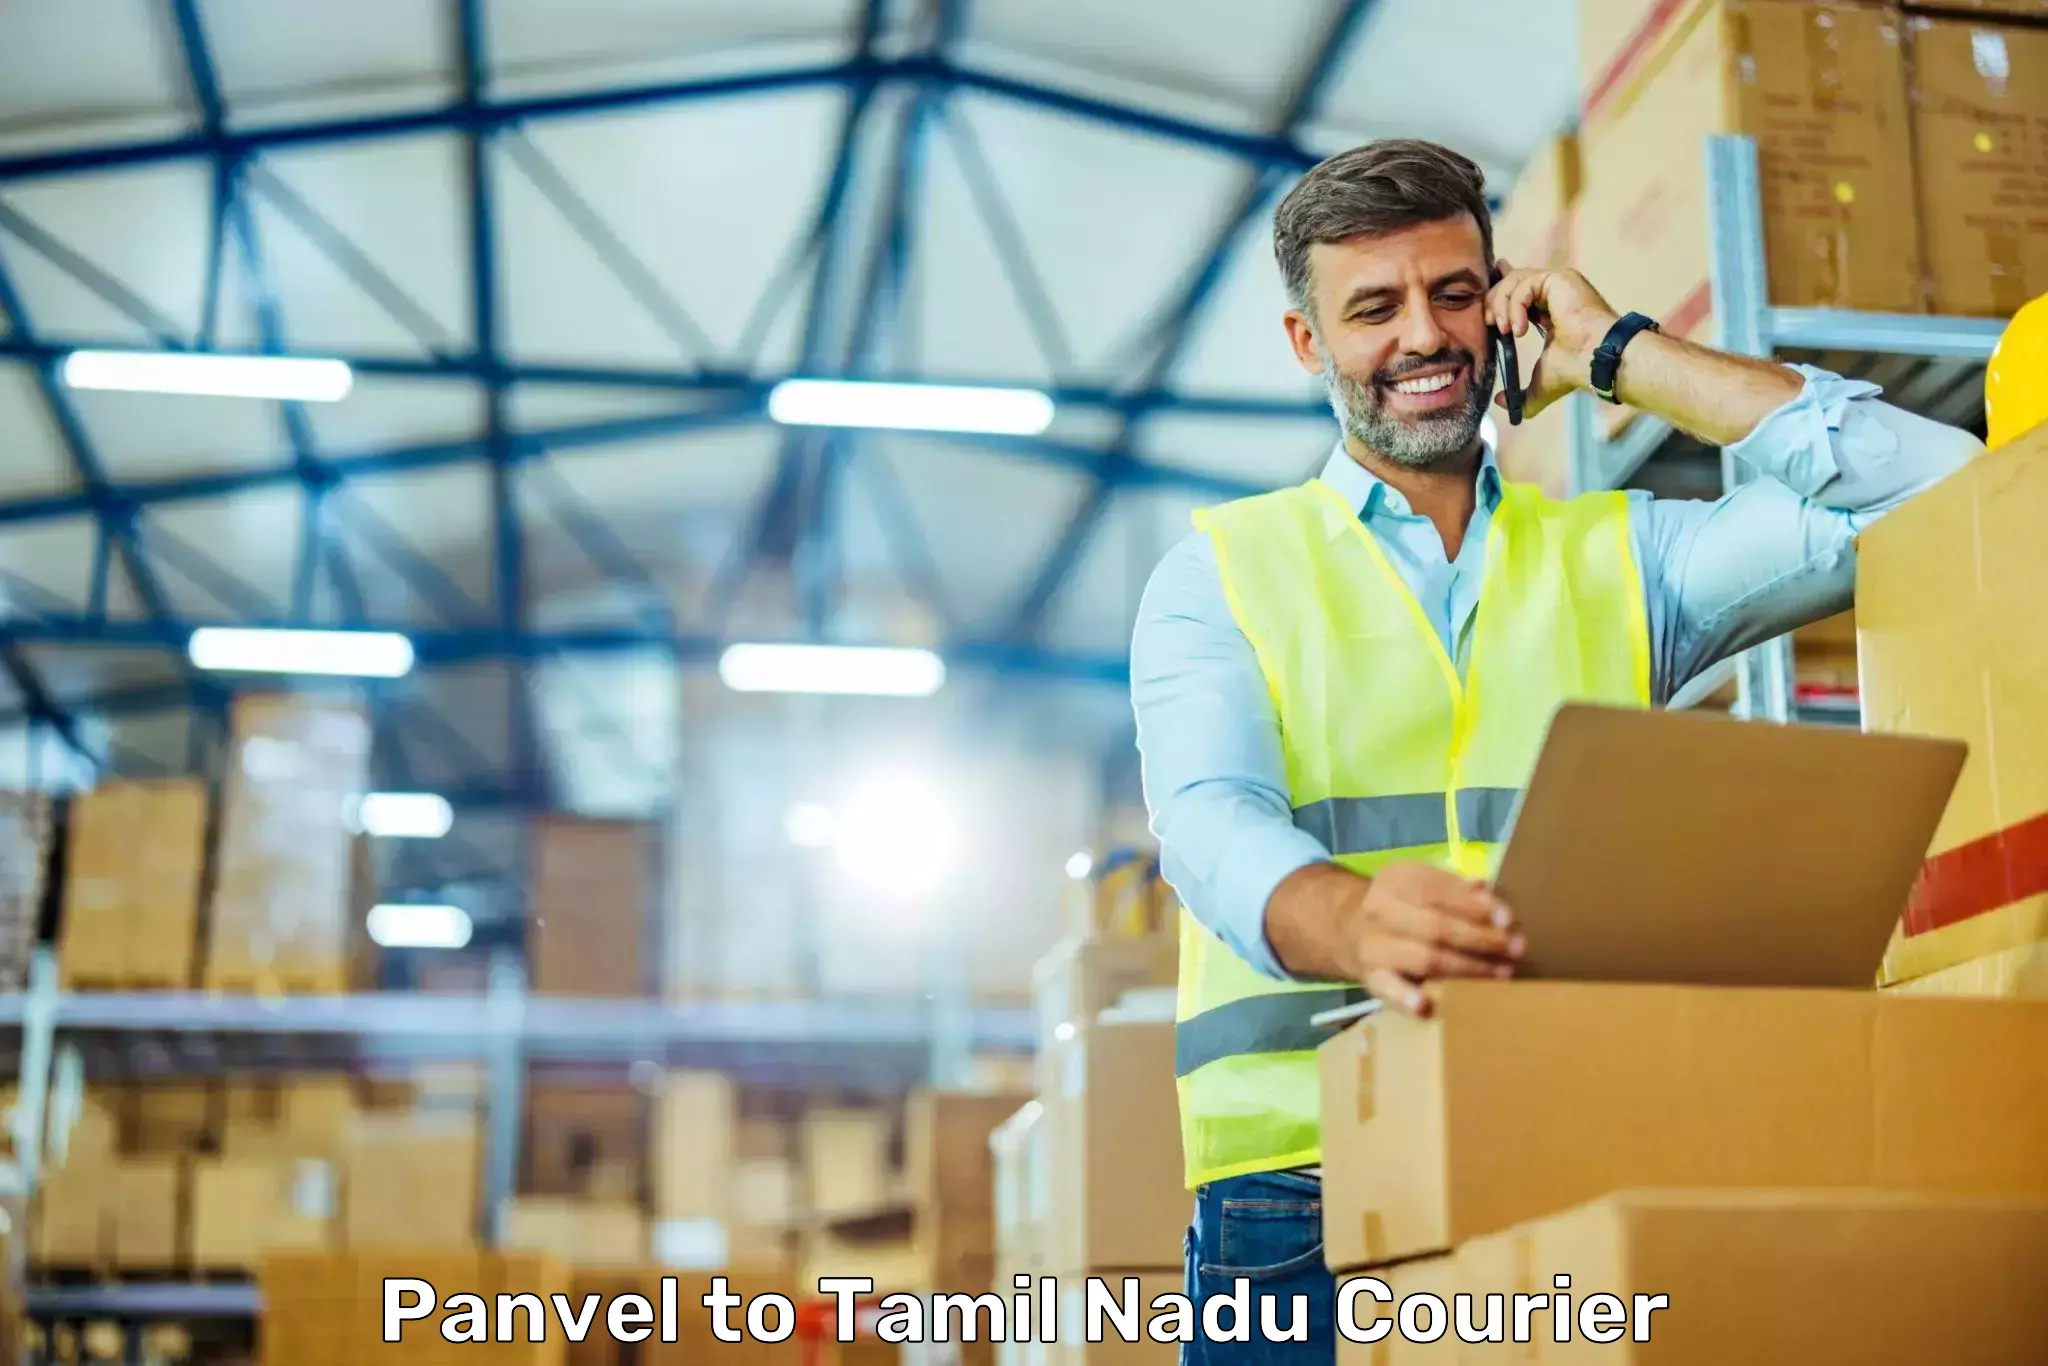 Speedy delivery service Panvel to Tiruchengode